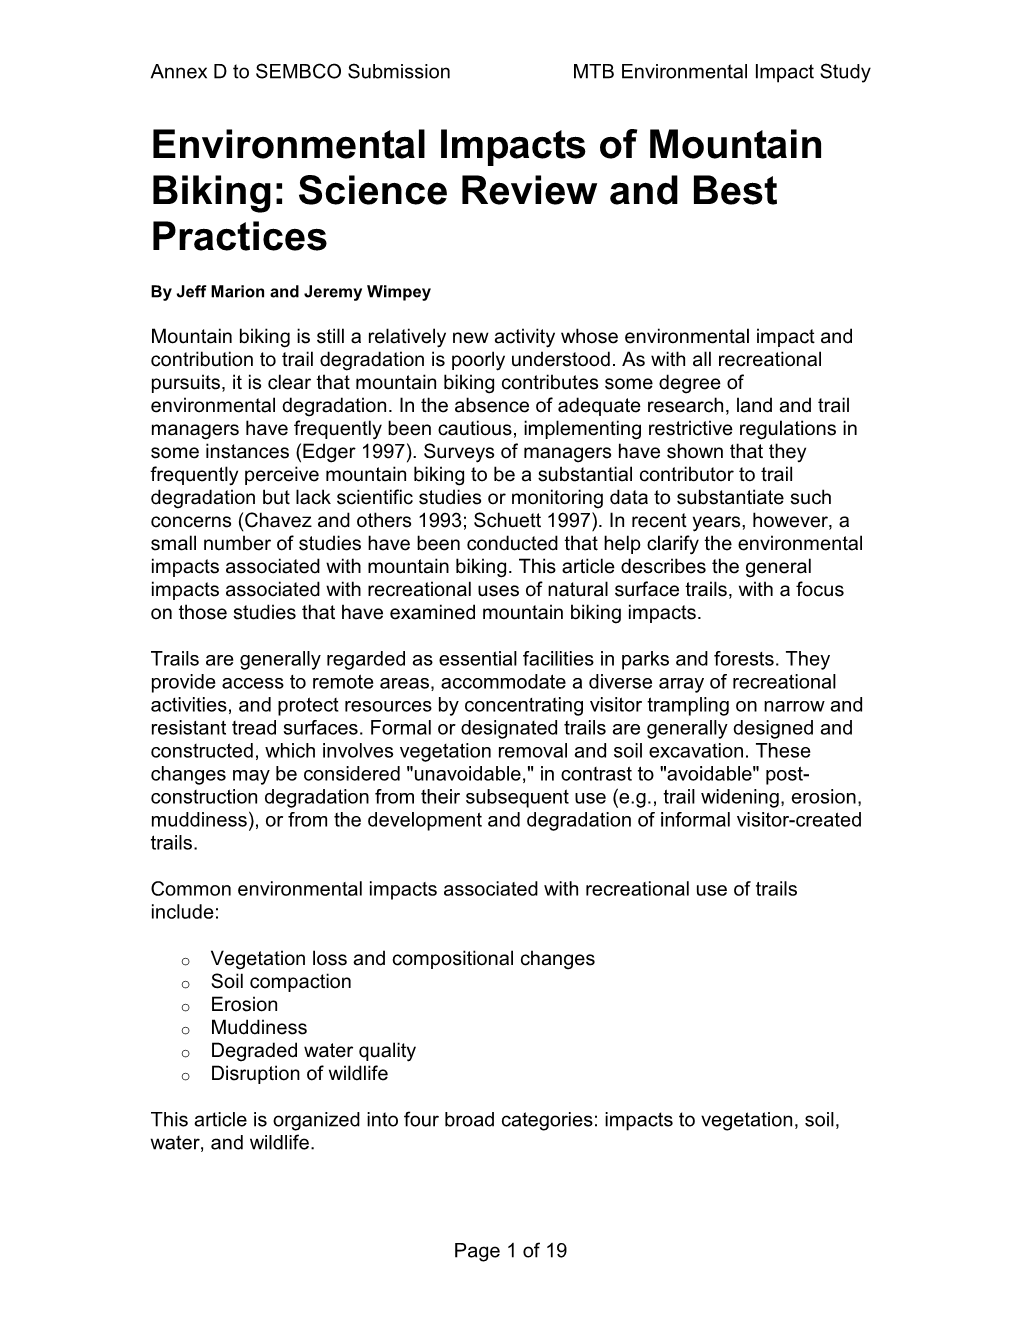 ecological impacts of mountain biking a critical literature review